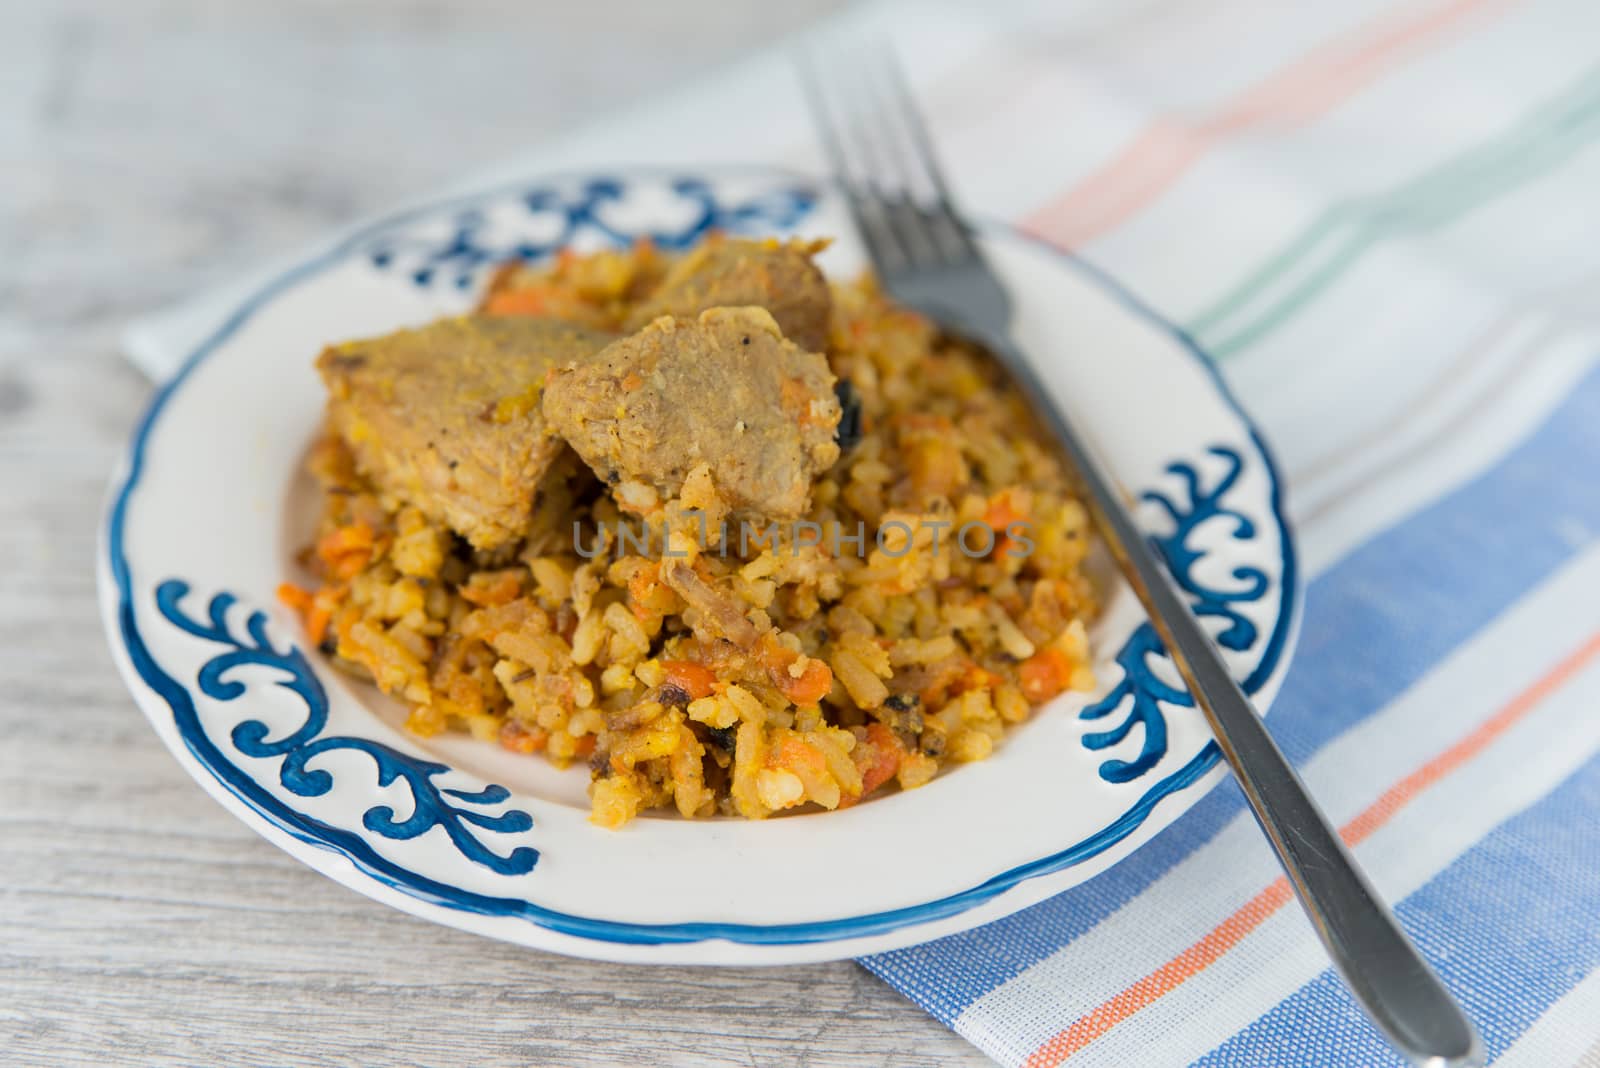 Plate of rice and meat dish pilau by Linaga